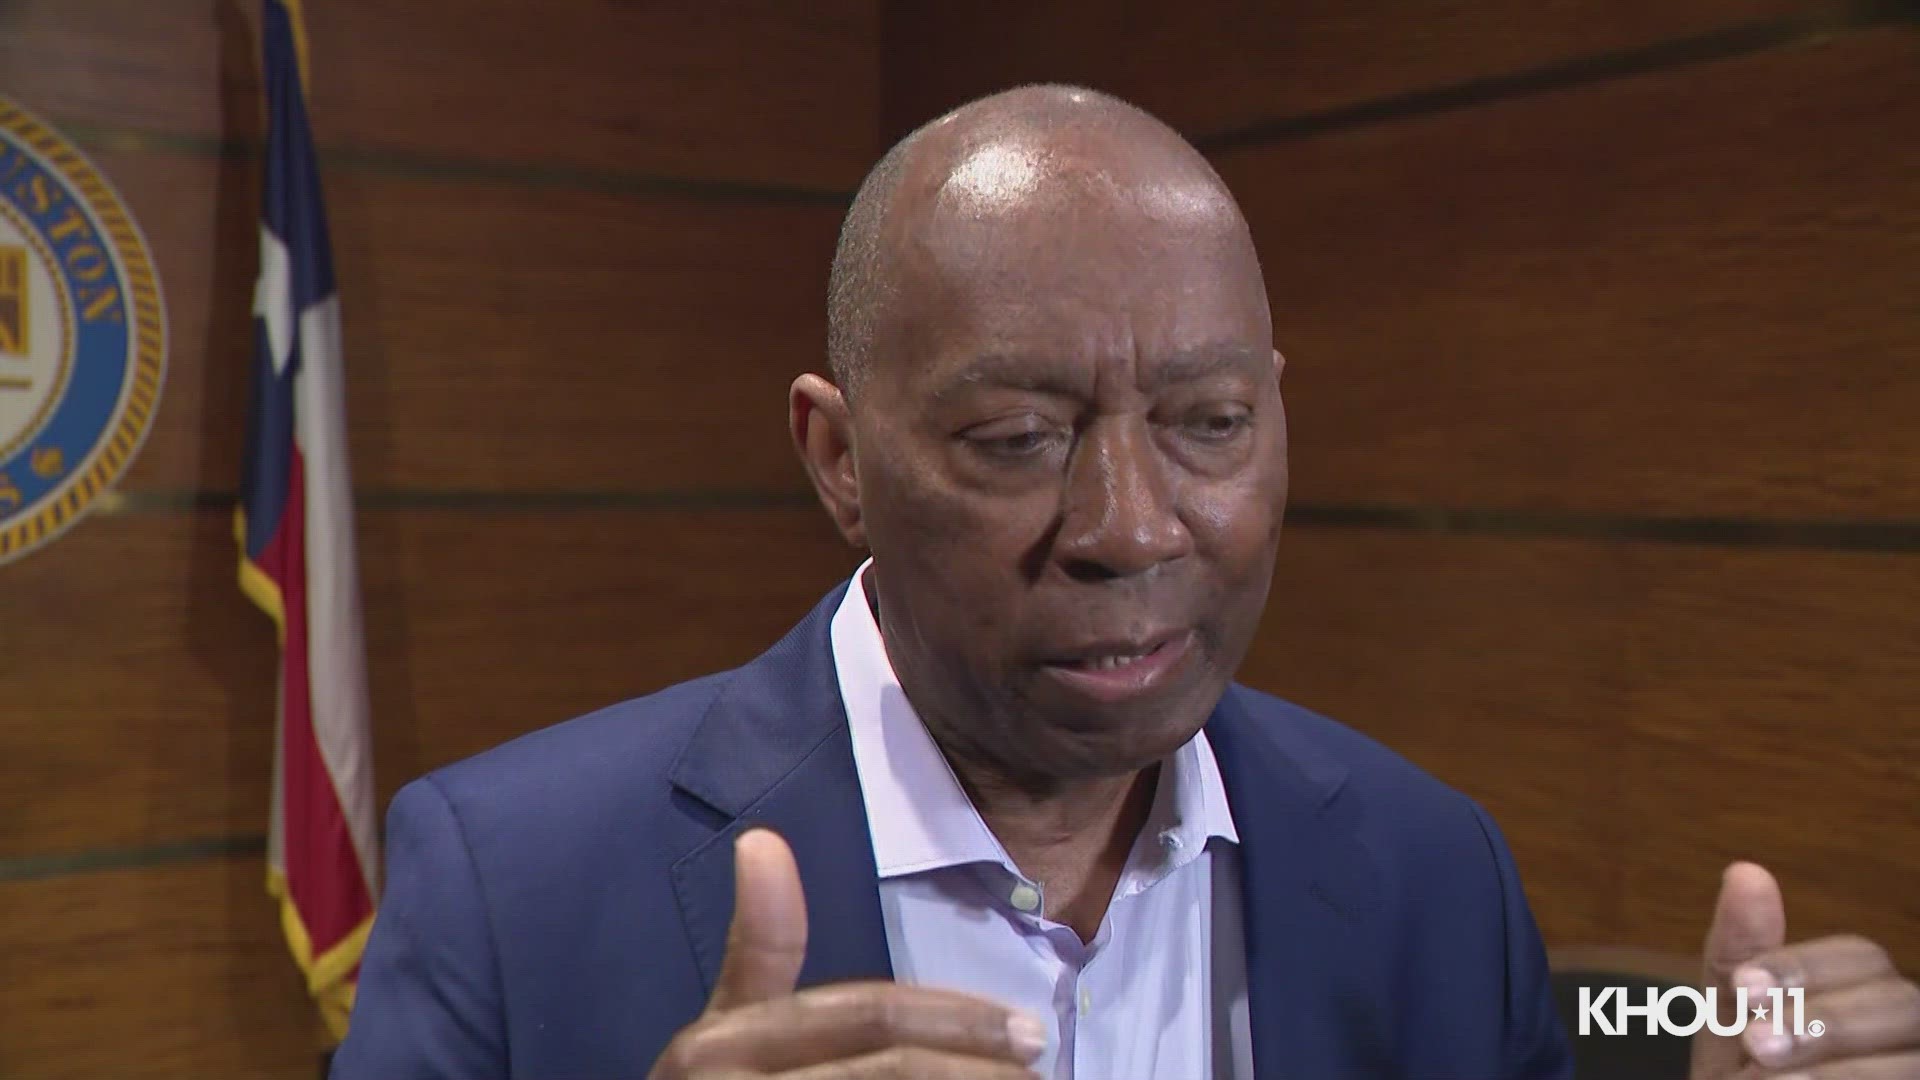 Houston Mayor Sylvester Turner called the TEA takeover of HISD a political move and said the focus should be on the safety of our schools and children.